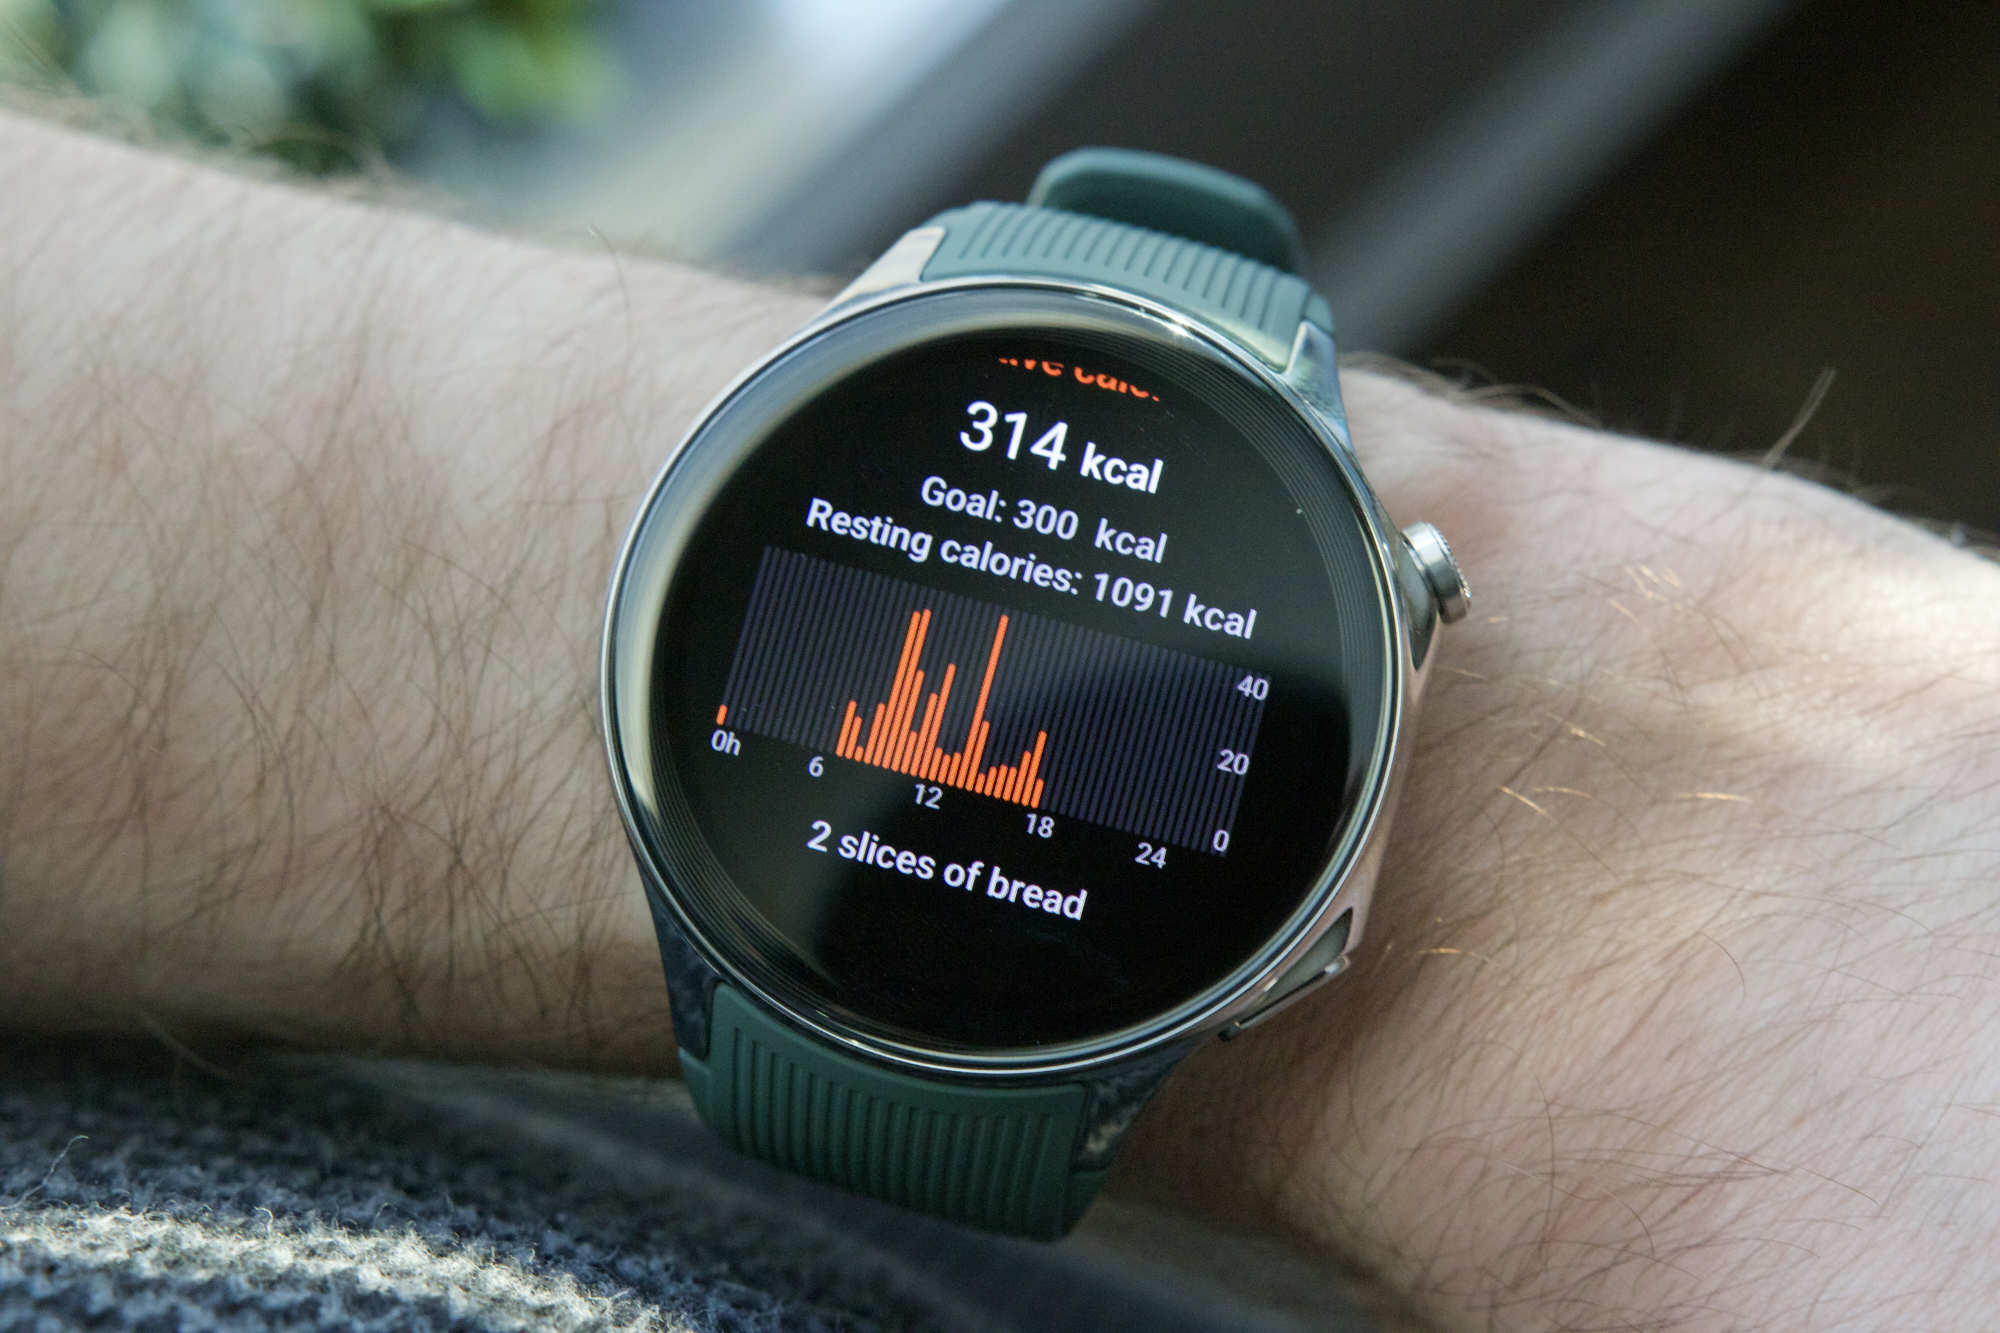 Someone wearing the OnePlus Watch 2, with the screen showing a graph of active calories burned.